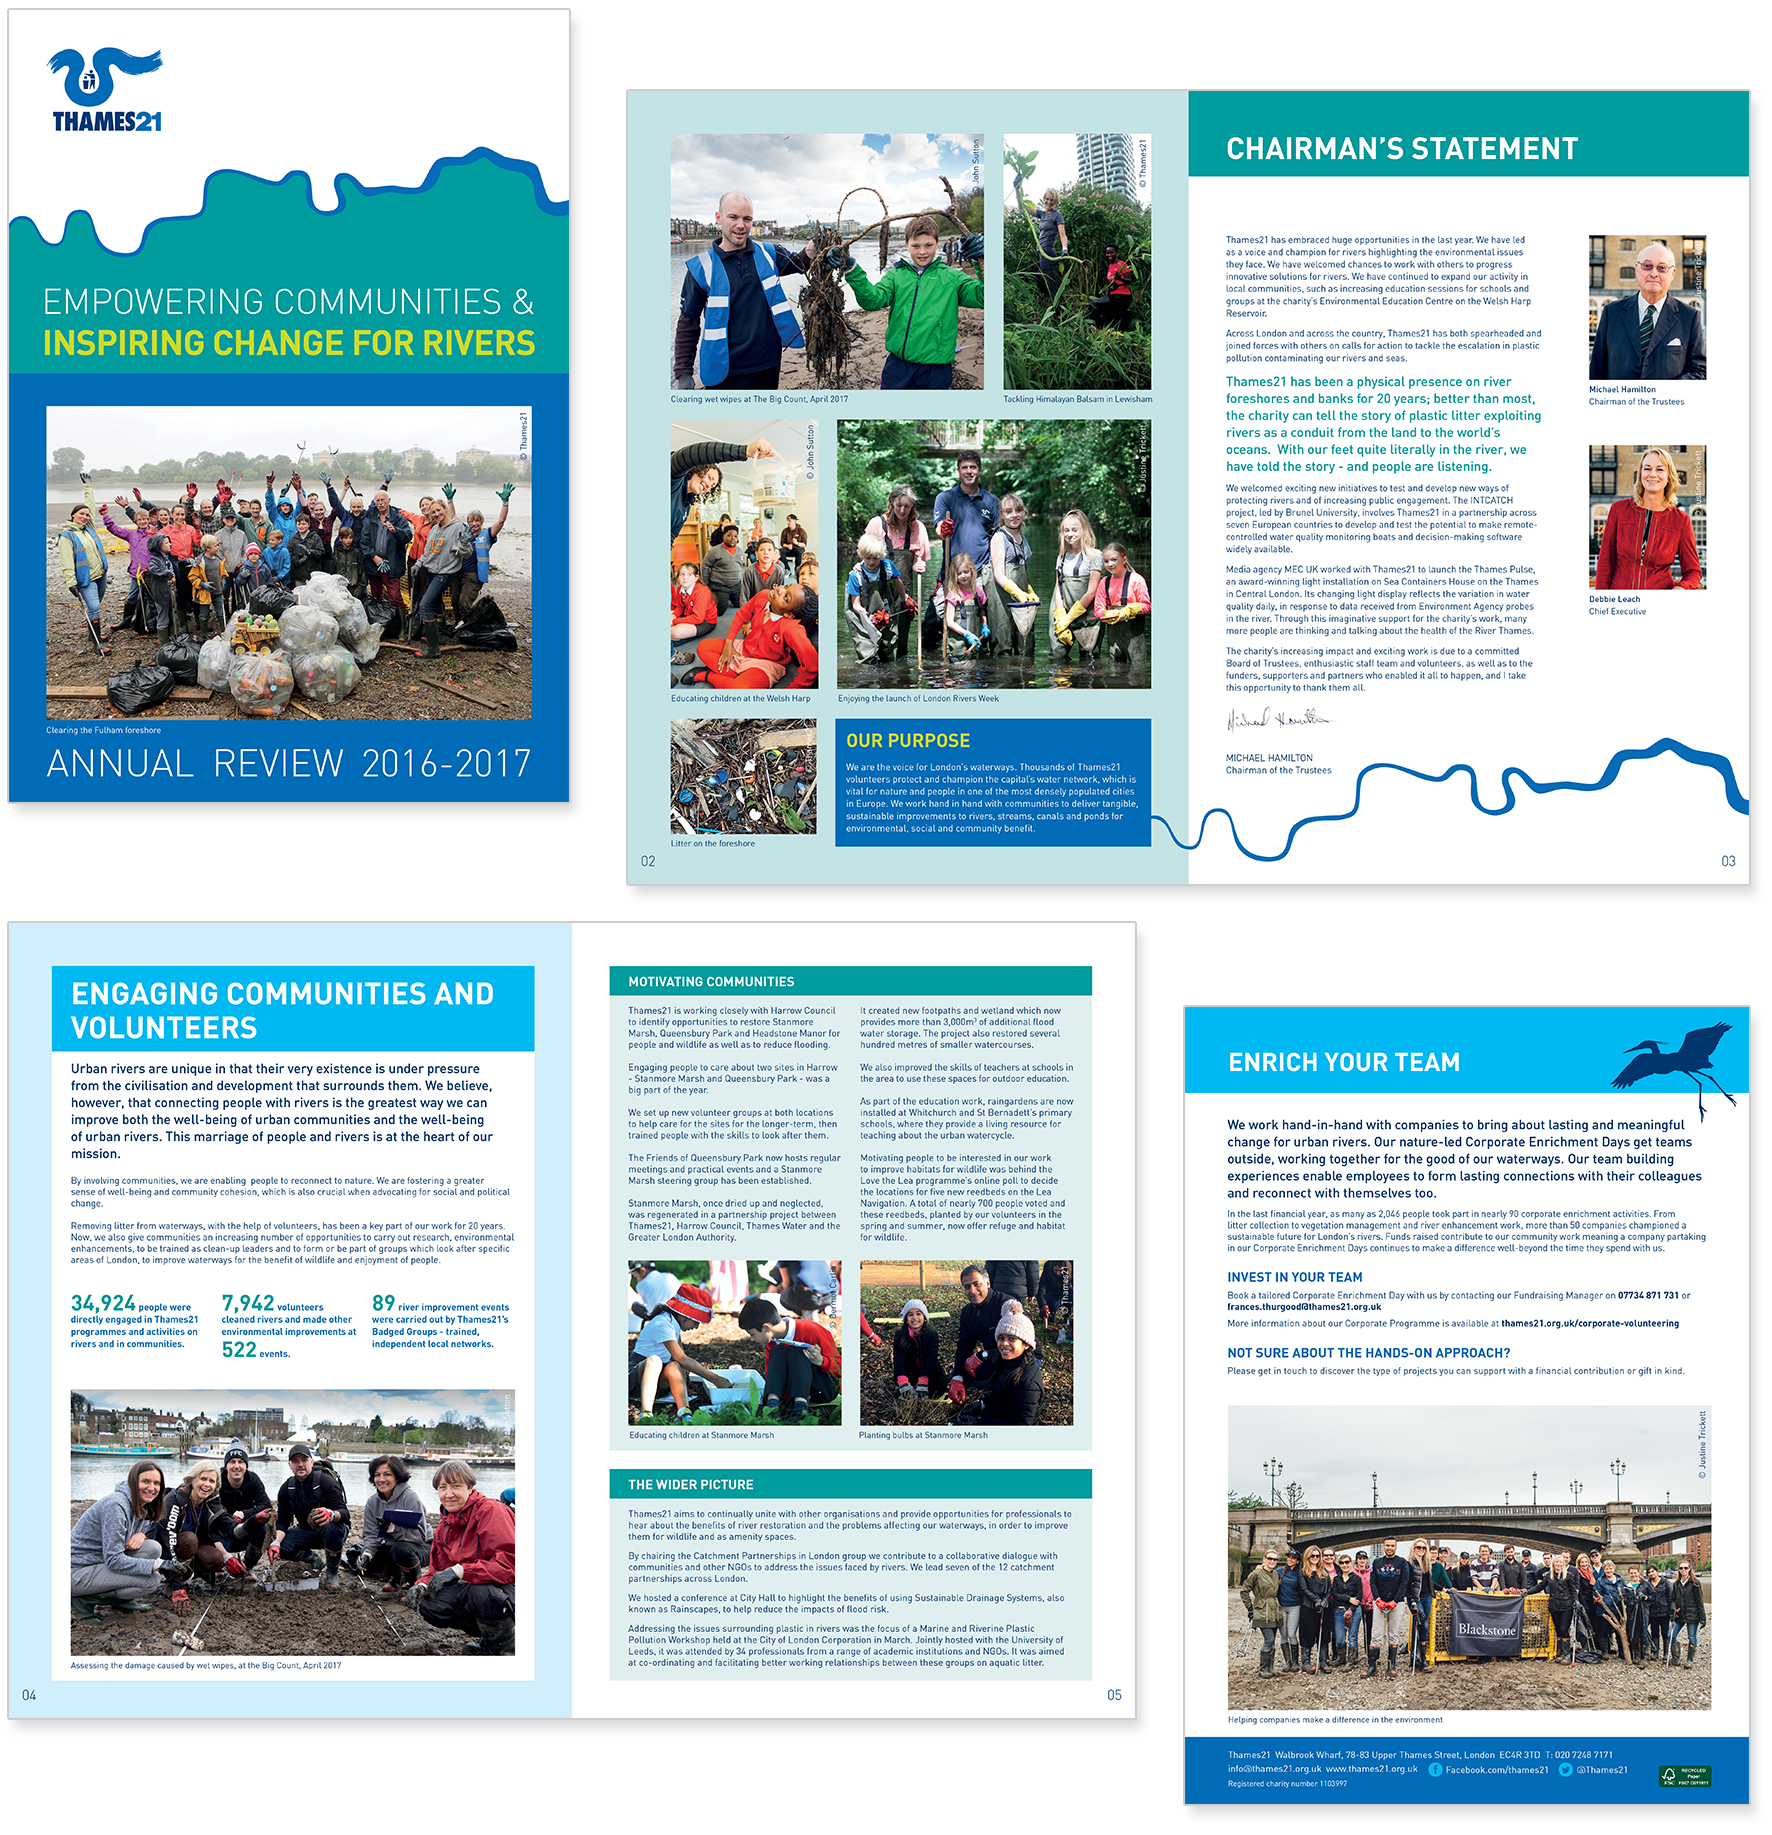 Sample pages from Annual Review for Thames21.